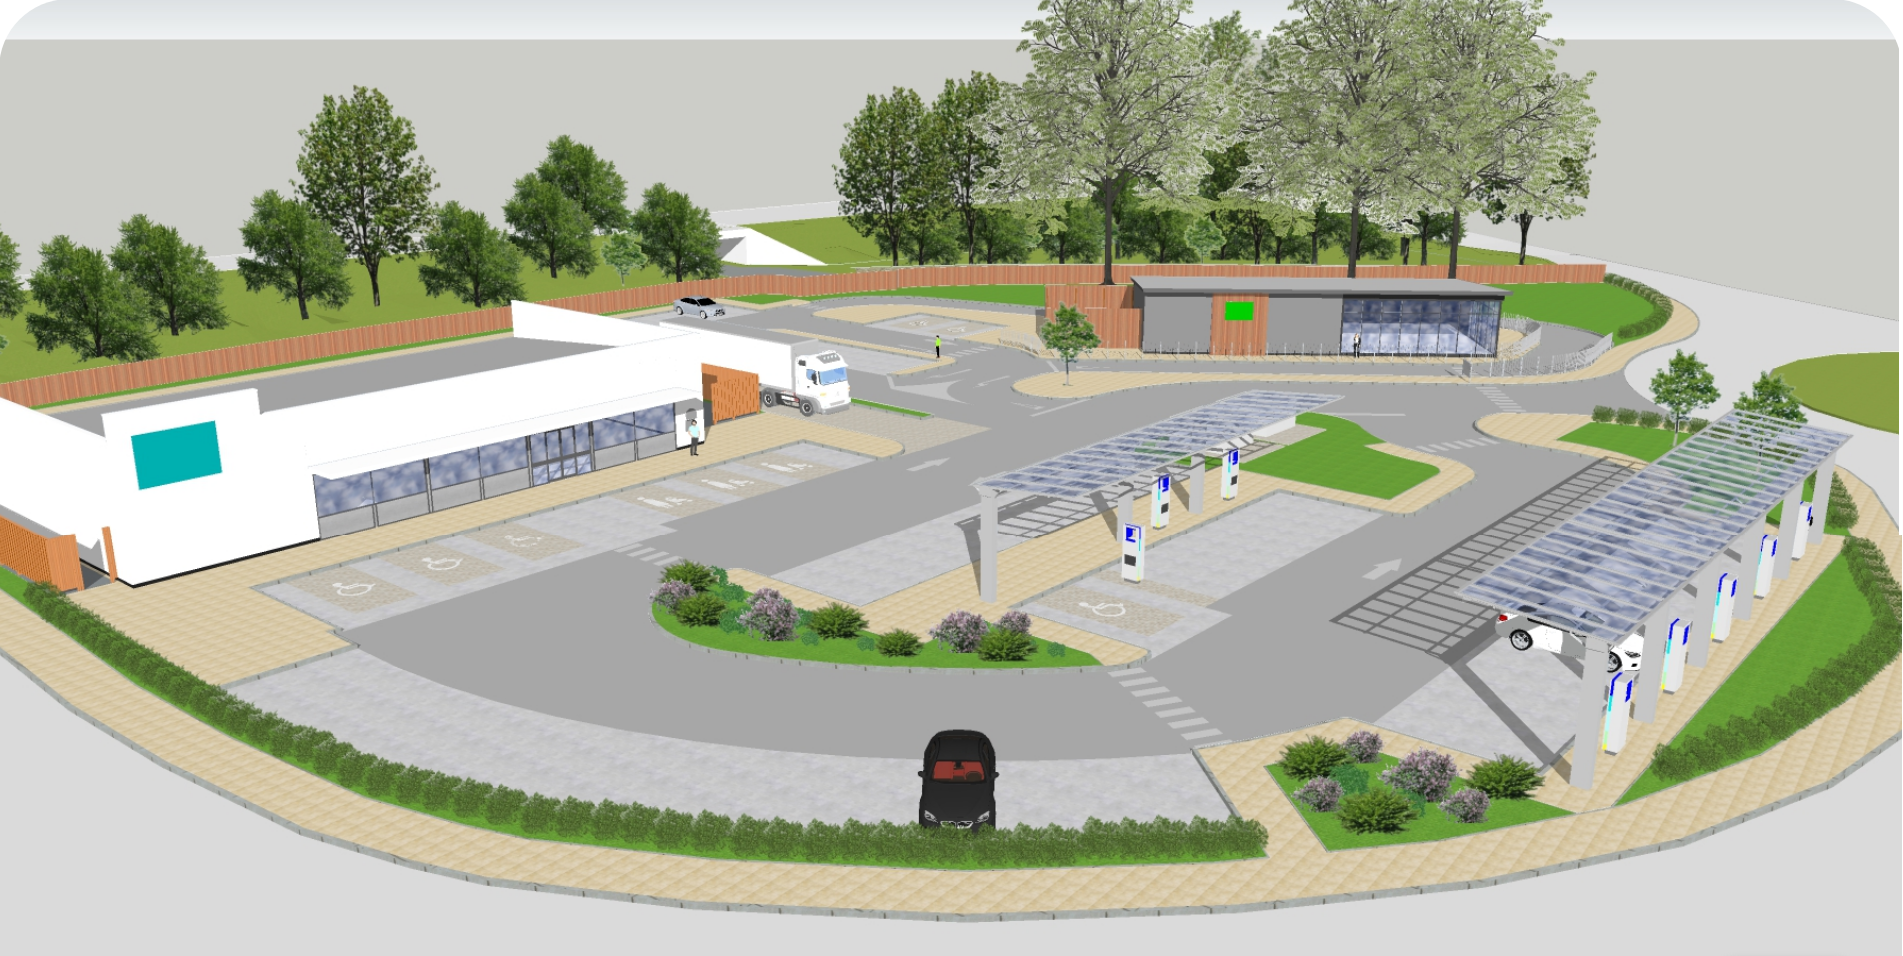 West Coast Estates unveils £6m shopping and charging hub plan near Inverness